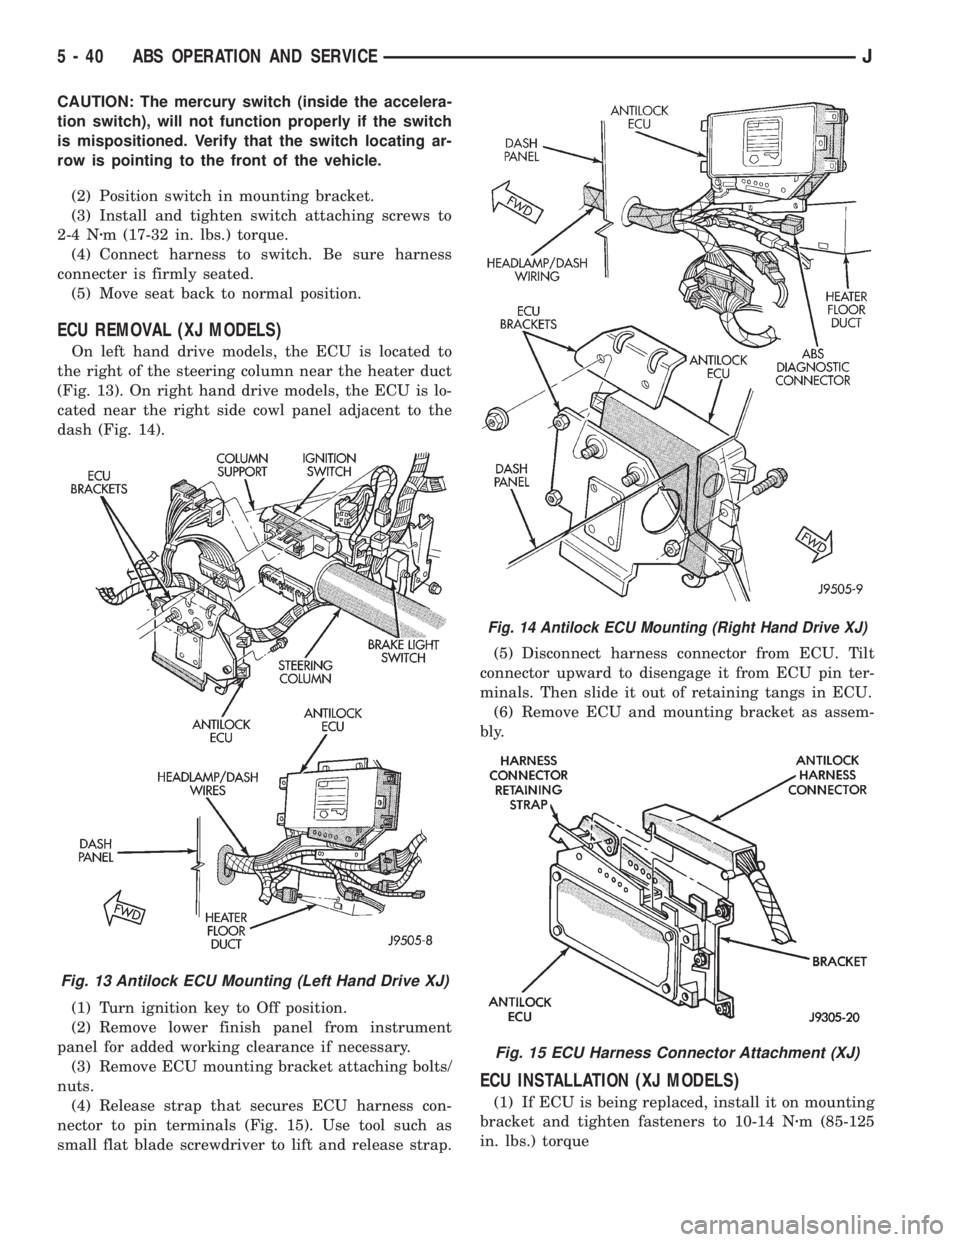 JEEP XJ 1995  Service And Repair Manual CAUTION: The mercury switch (inside the accelera-
tion switch), will not function properly if the switch
is mispositioned. Verify that the switch locating ar-
row is pointing to the front of the vehic